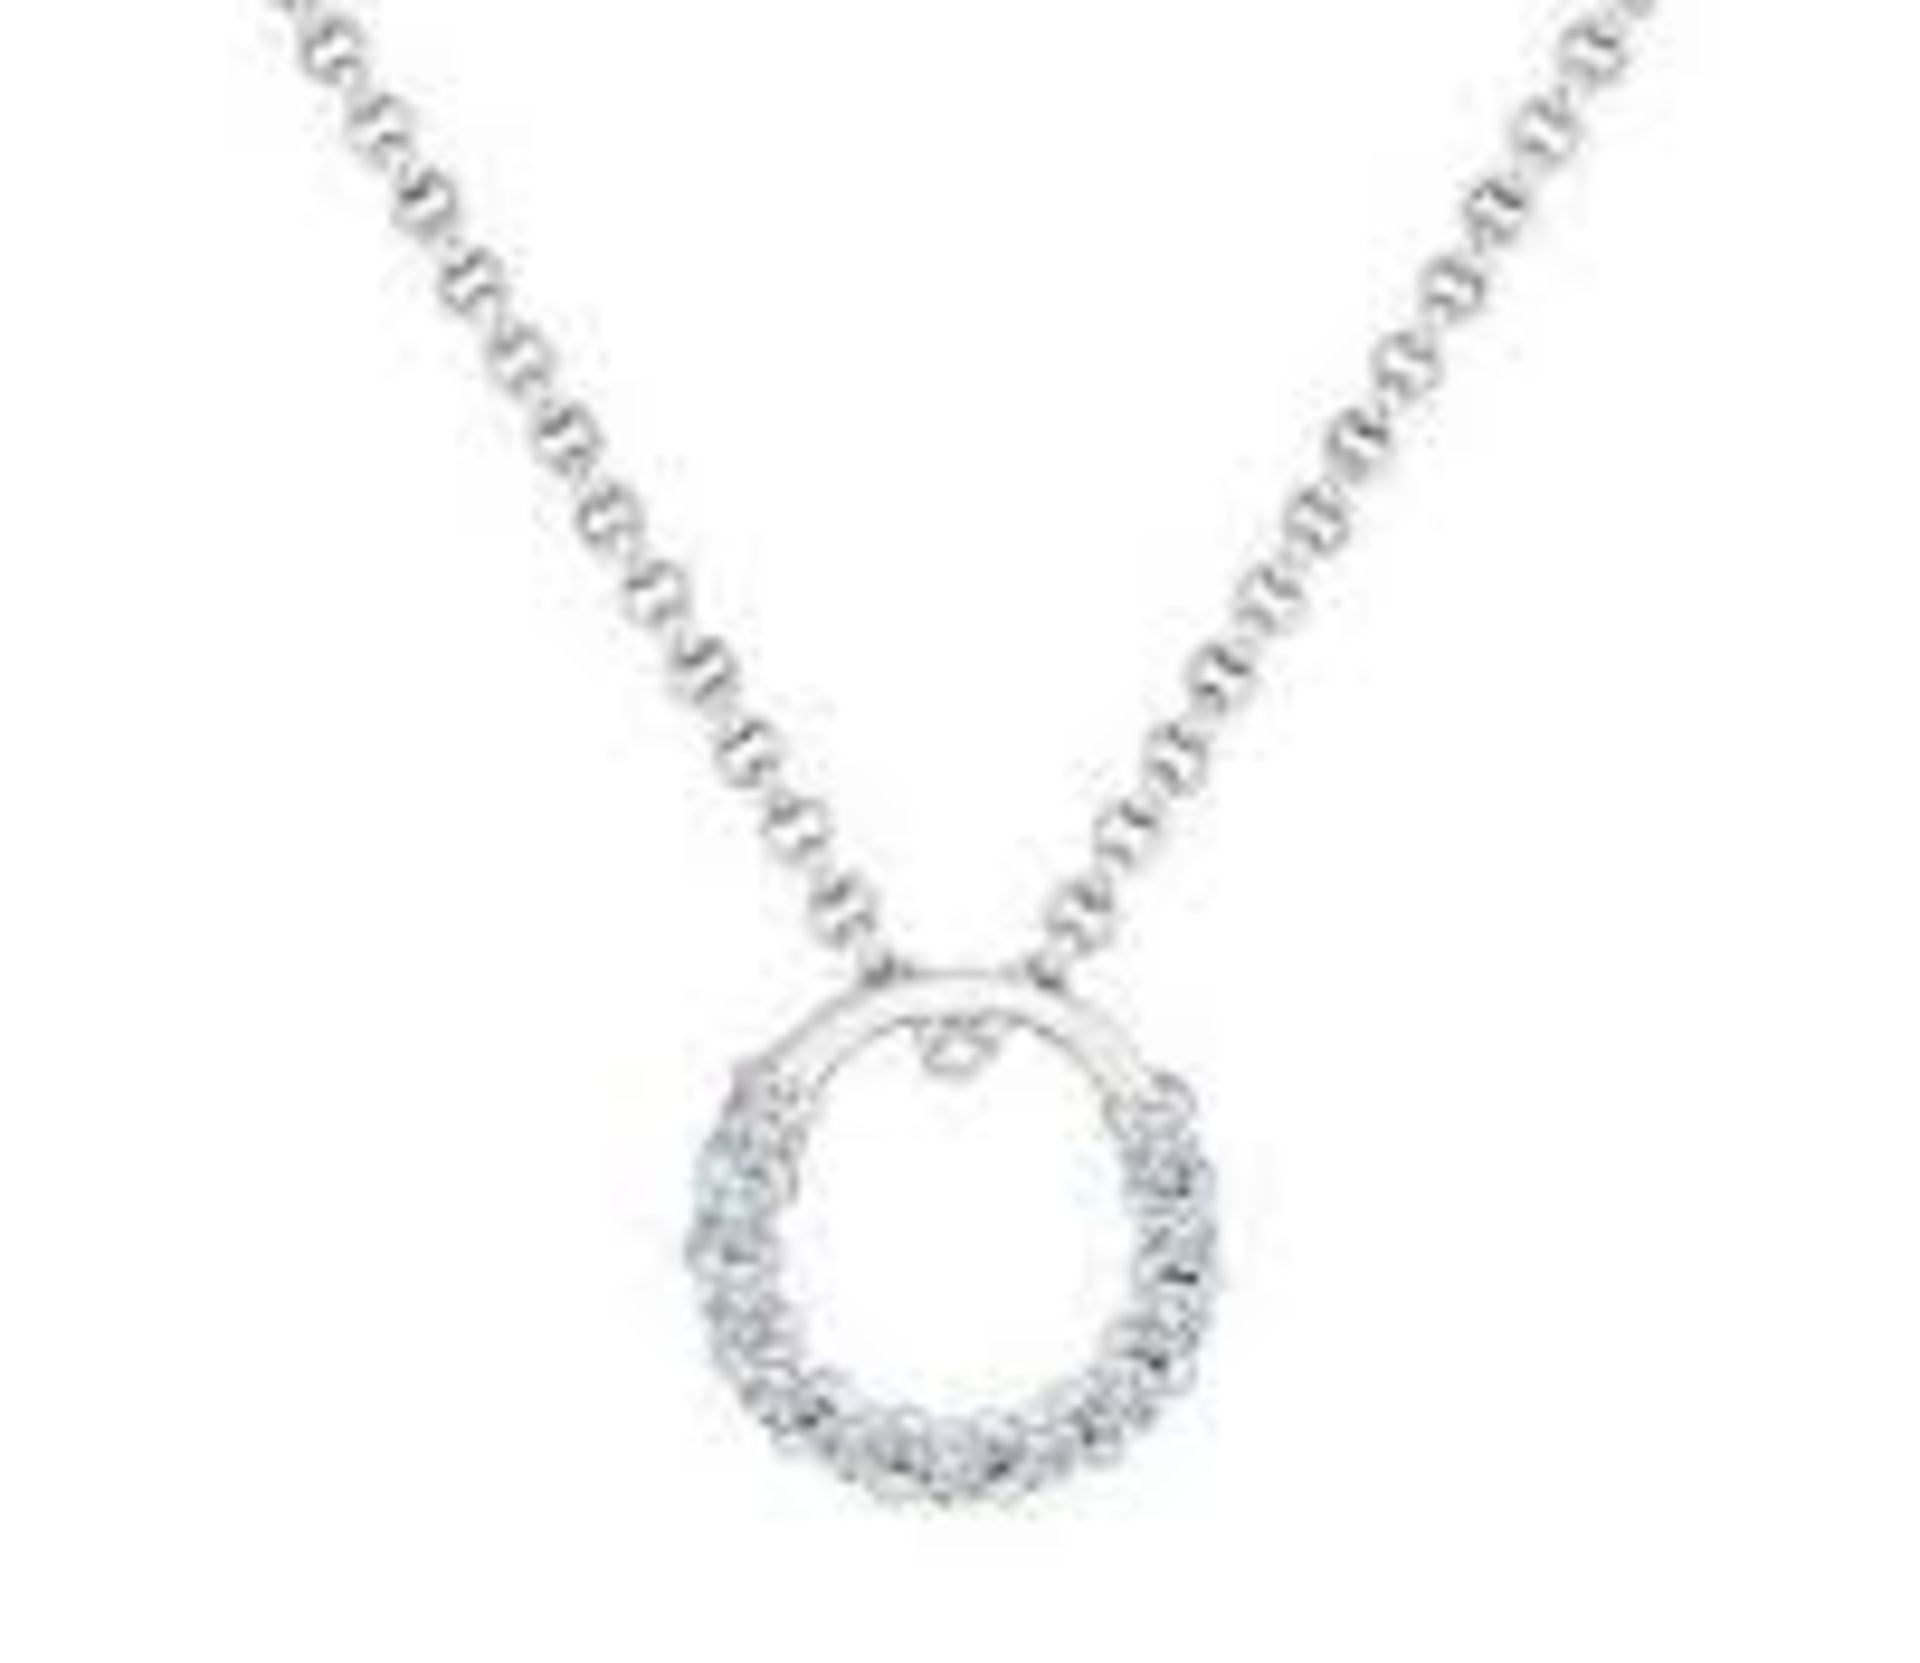 8 X BRAND NEW DIAMONDSTYLE LONDON SEMI-CIRCLE PENDANT WITH CERTIFICATION OF AUTHENTICITY RRP £65